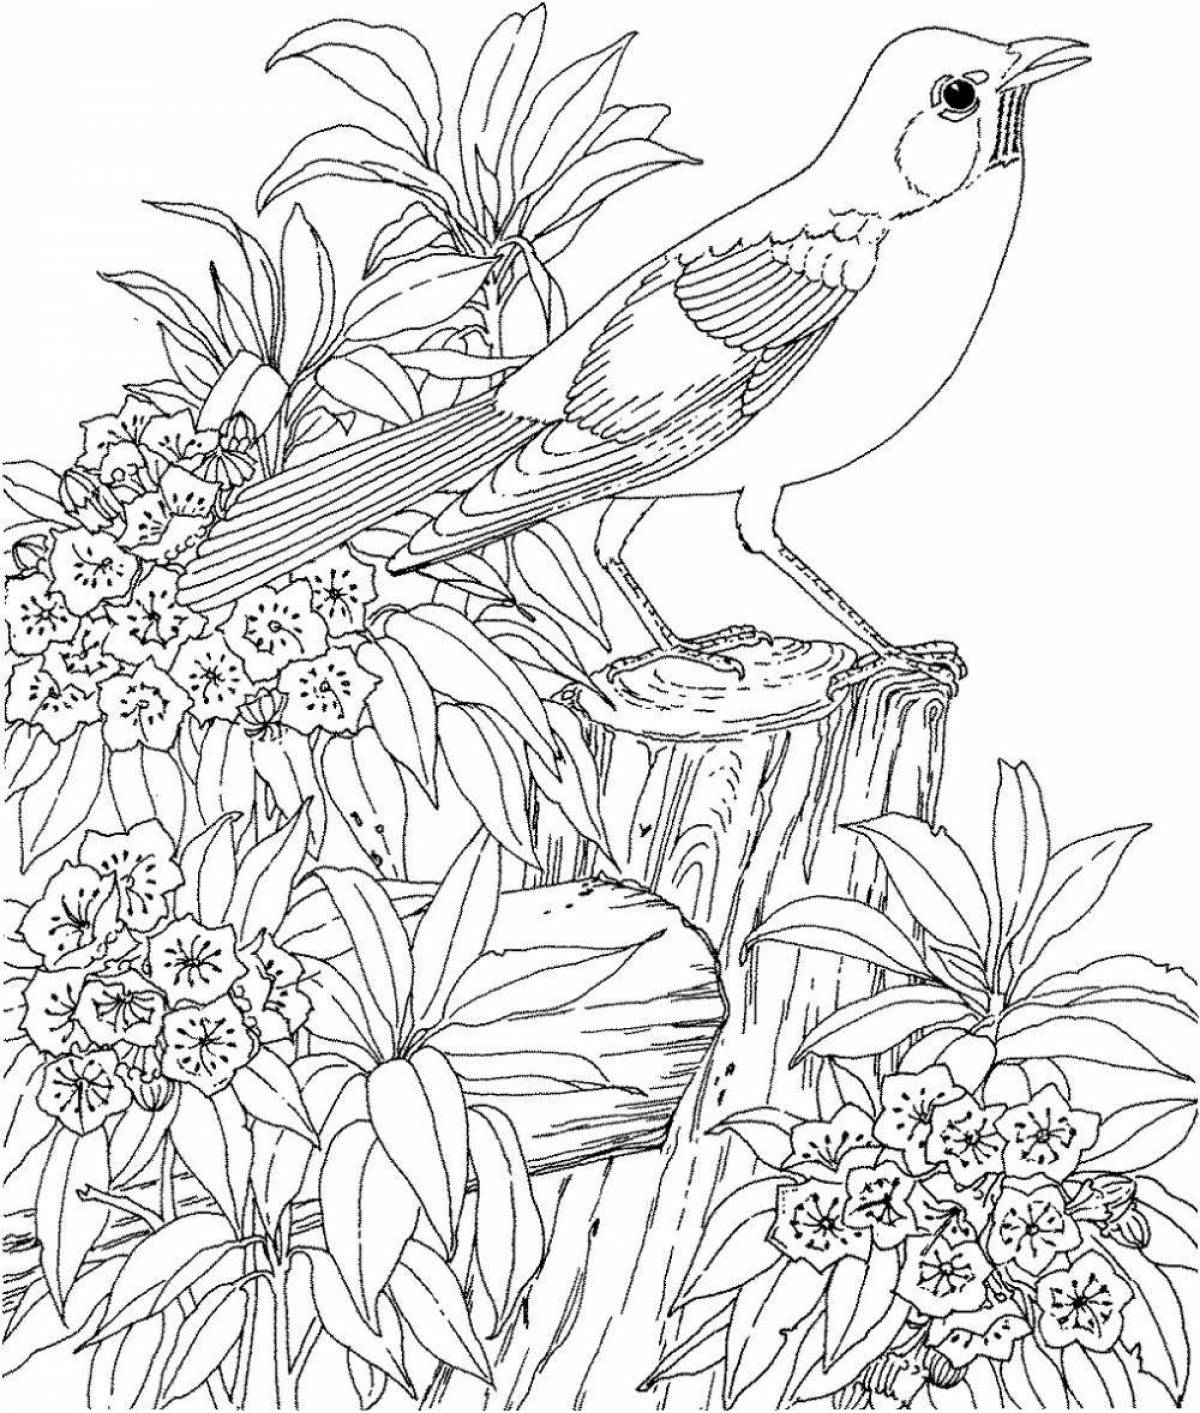 Great nature coloring book for 10 year olds